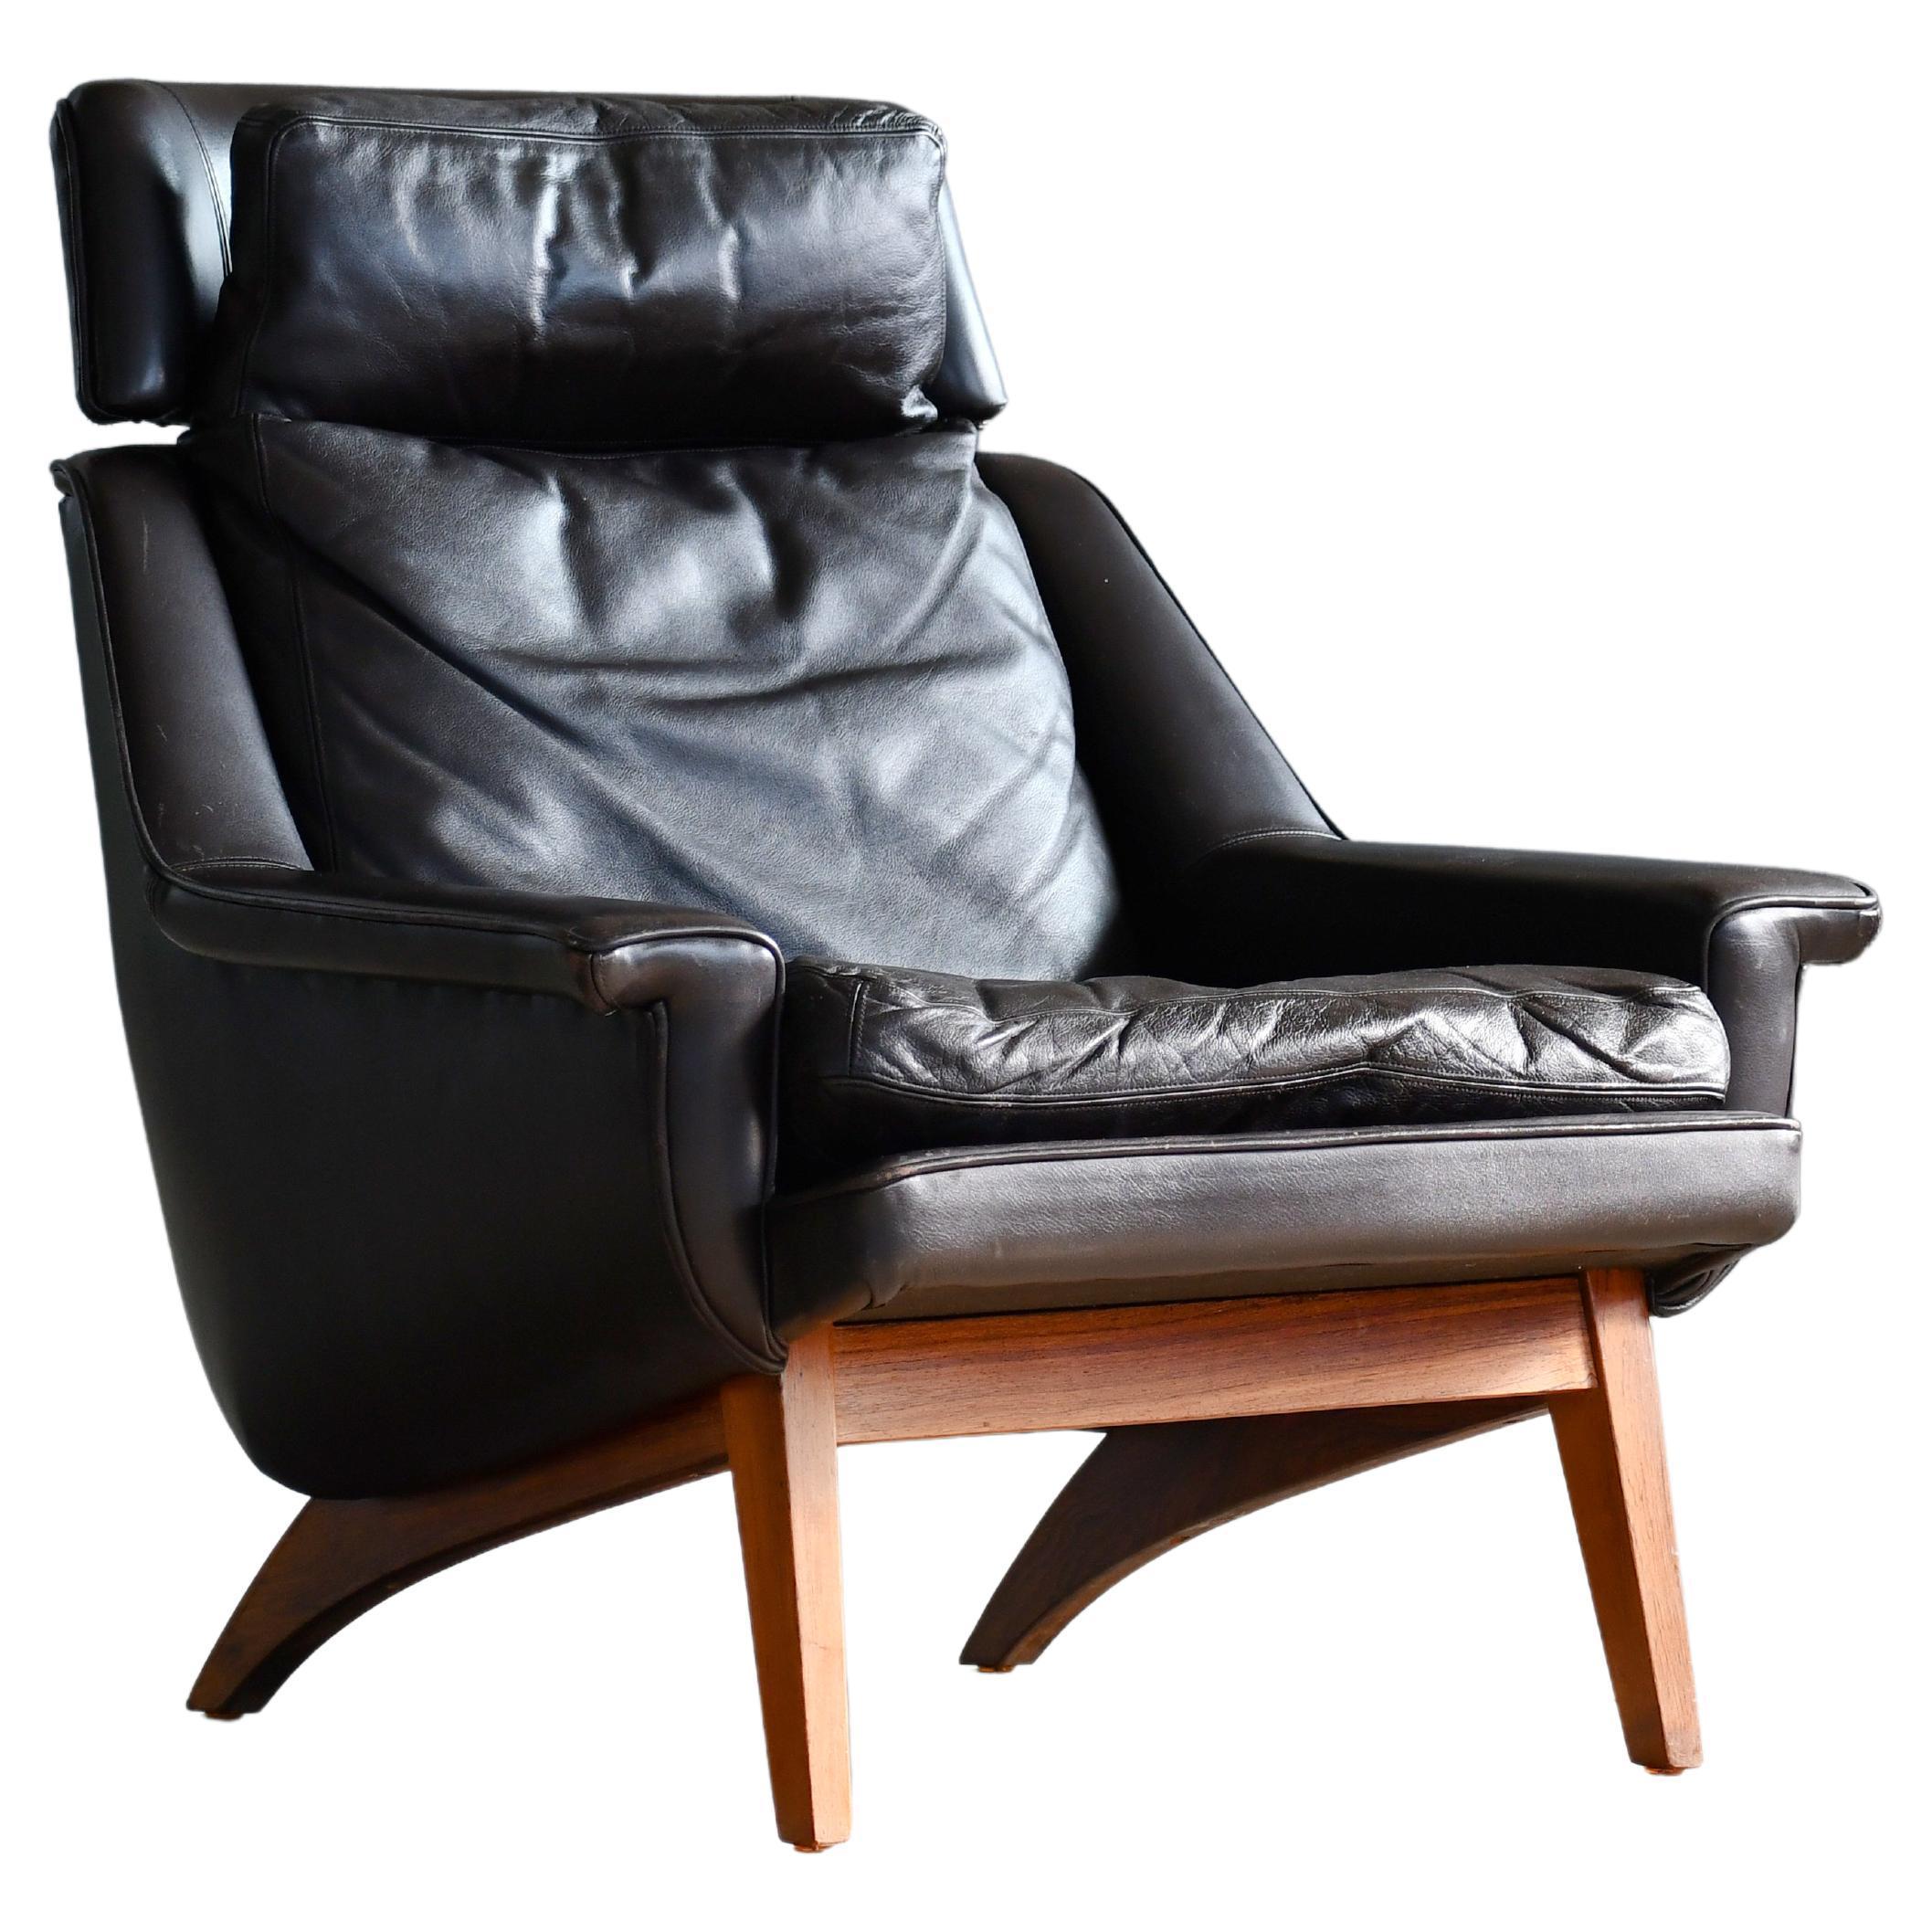 1960's Danish Teak Lounge Chair for ESA by Langfeld Design in Black Leather For Sale